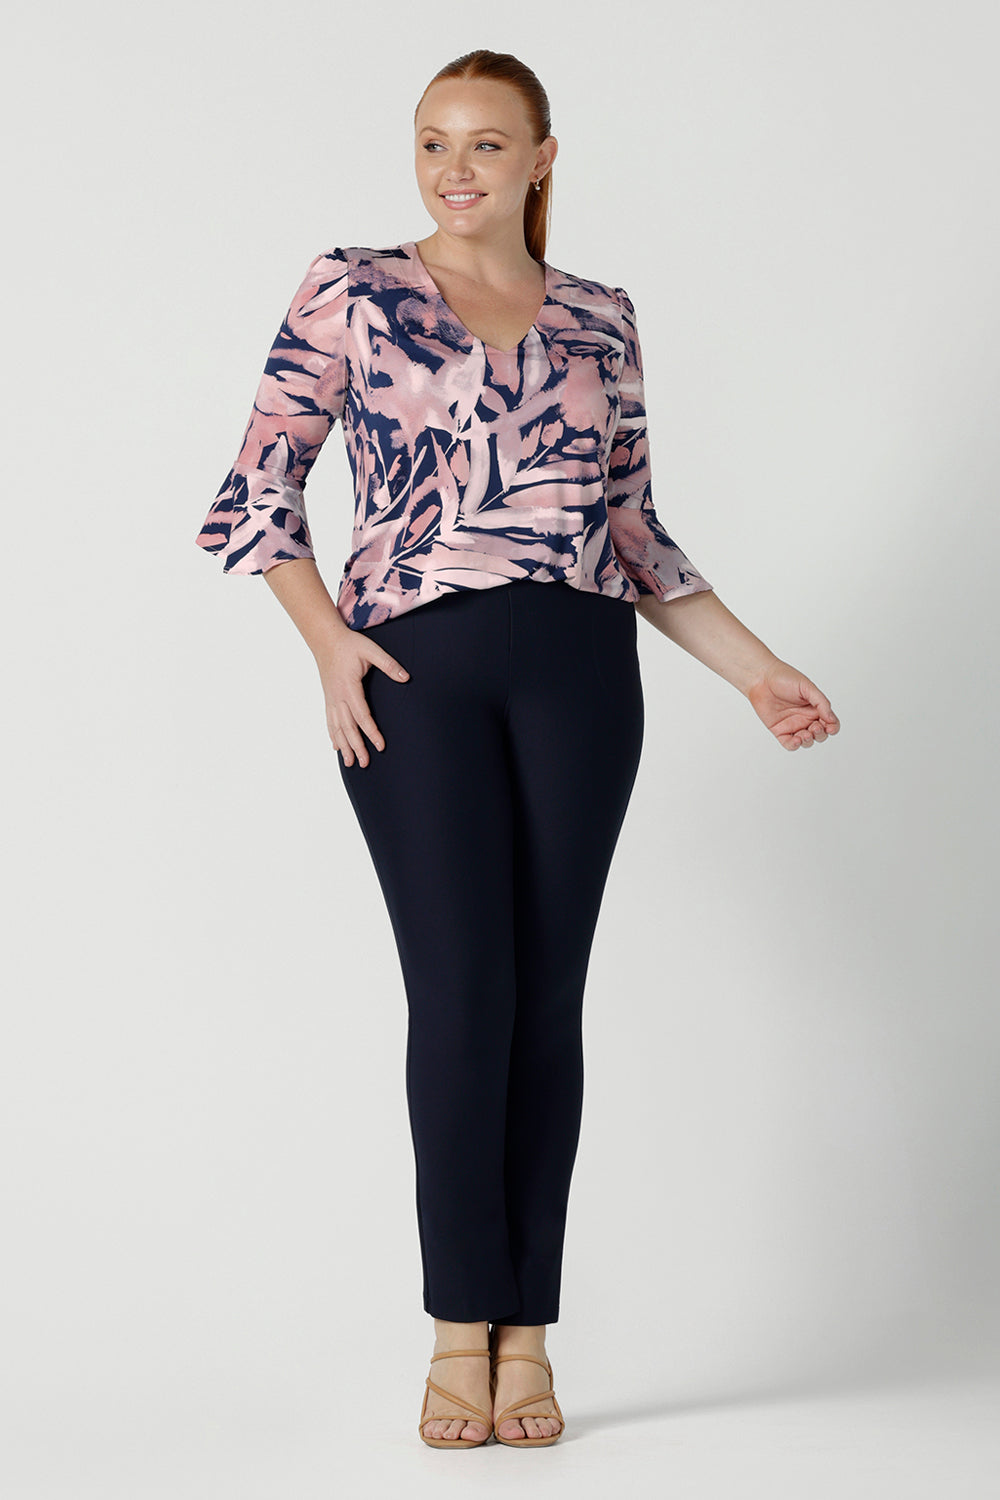 A size 12 woman wears the Tahlia top in Cantata. Fluted sleeves and a v-neckline. A great V-neckline top with 3/4 sleeves. Soft slinky jersey perfect for comfortable workwear for women size 8 - 24.